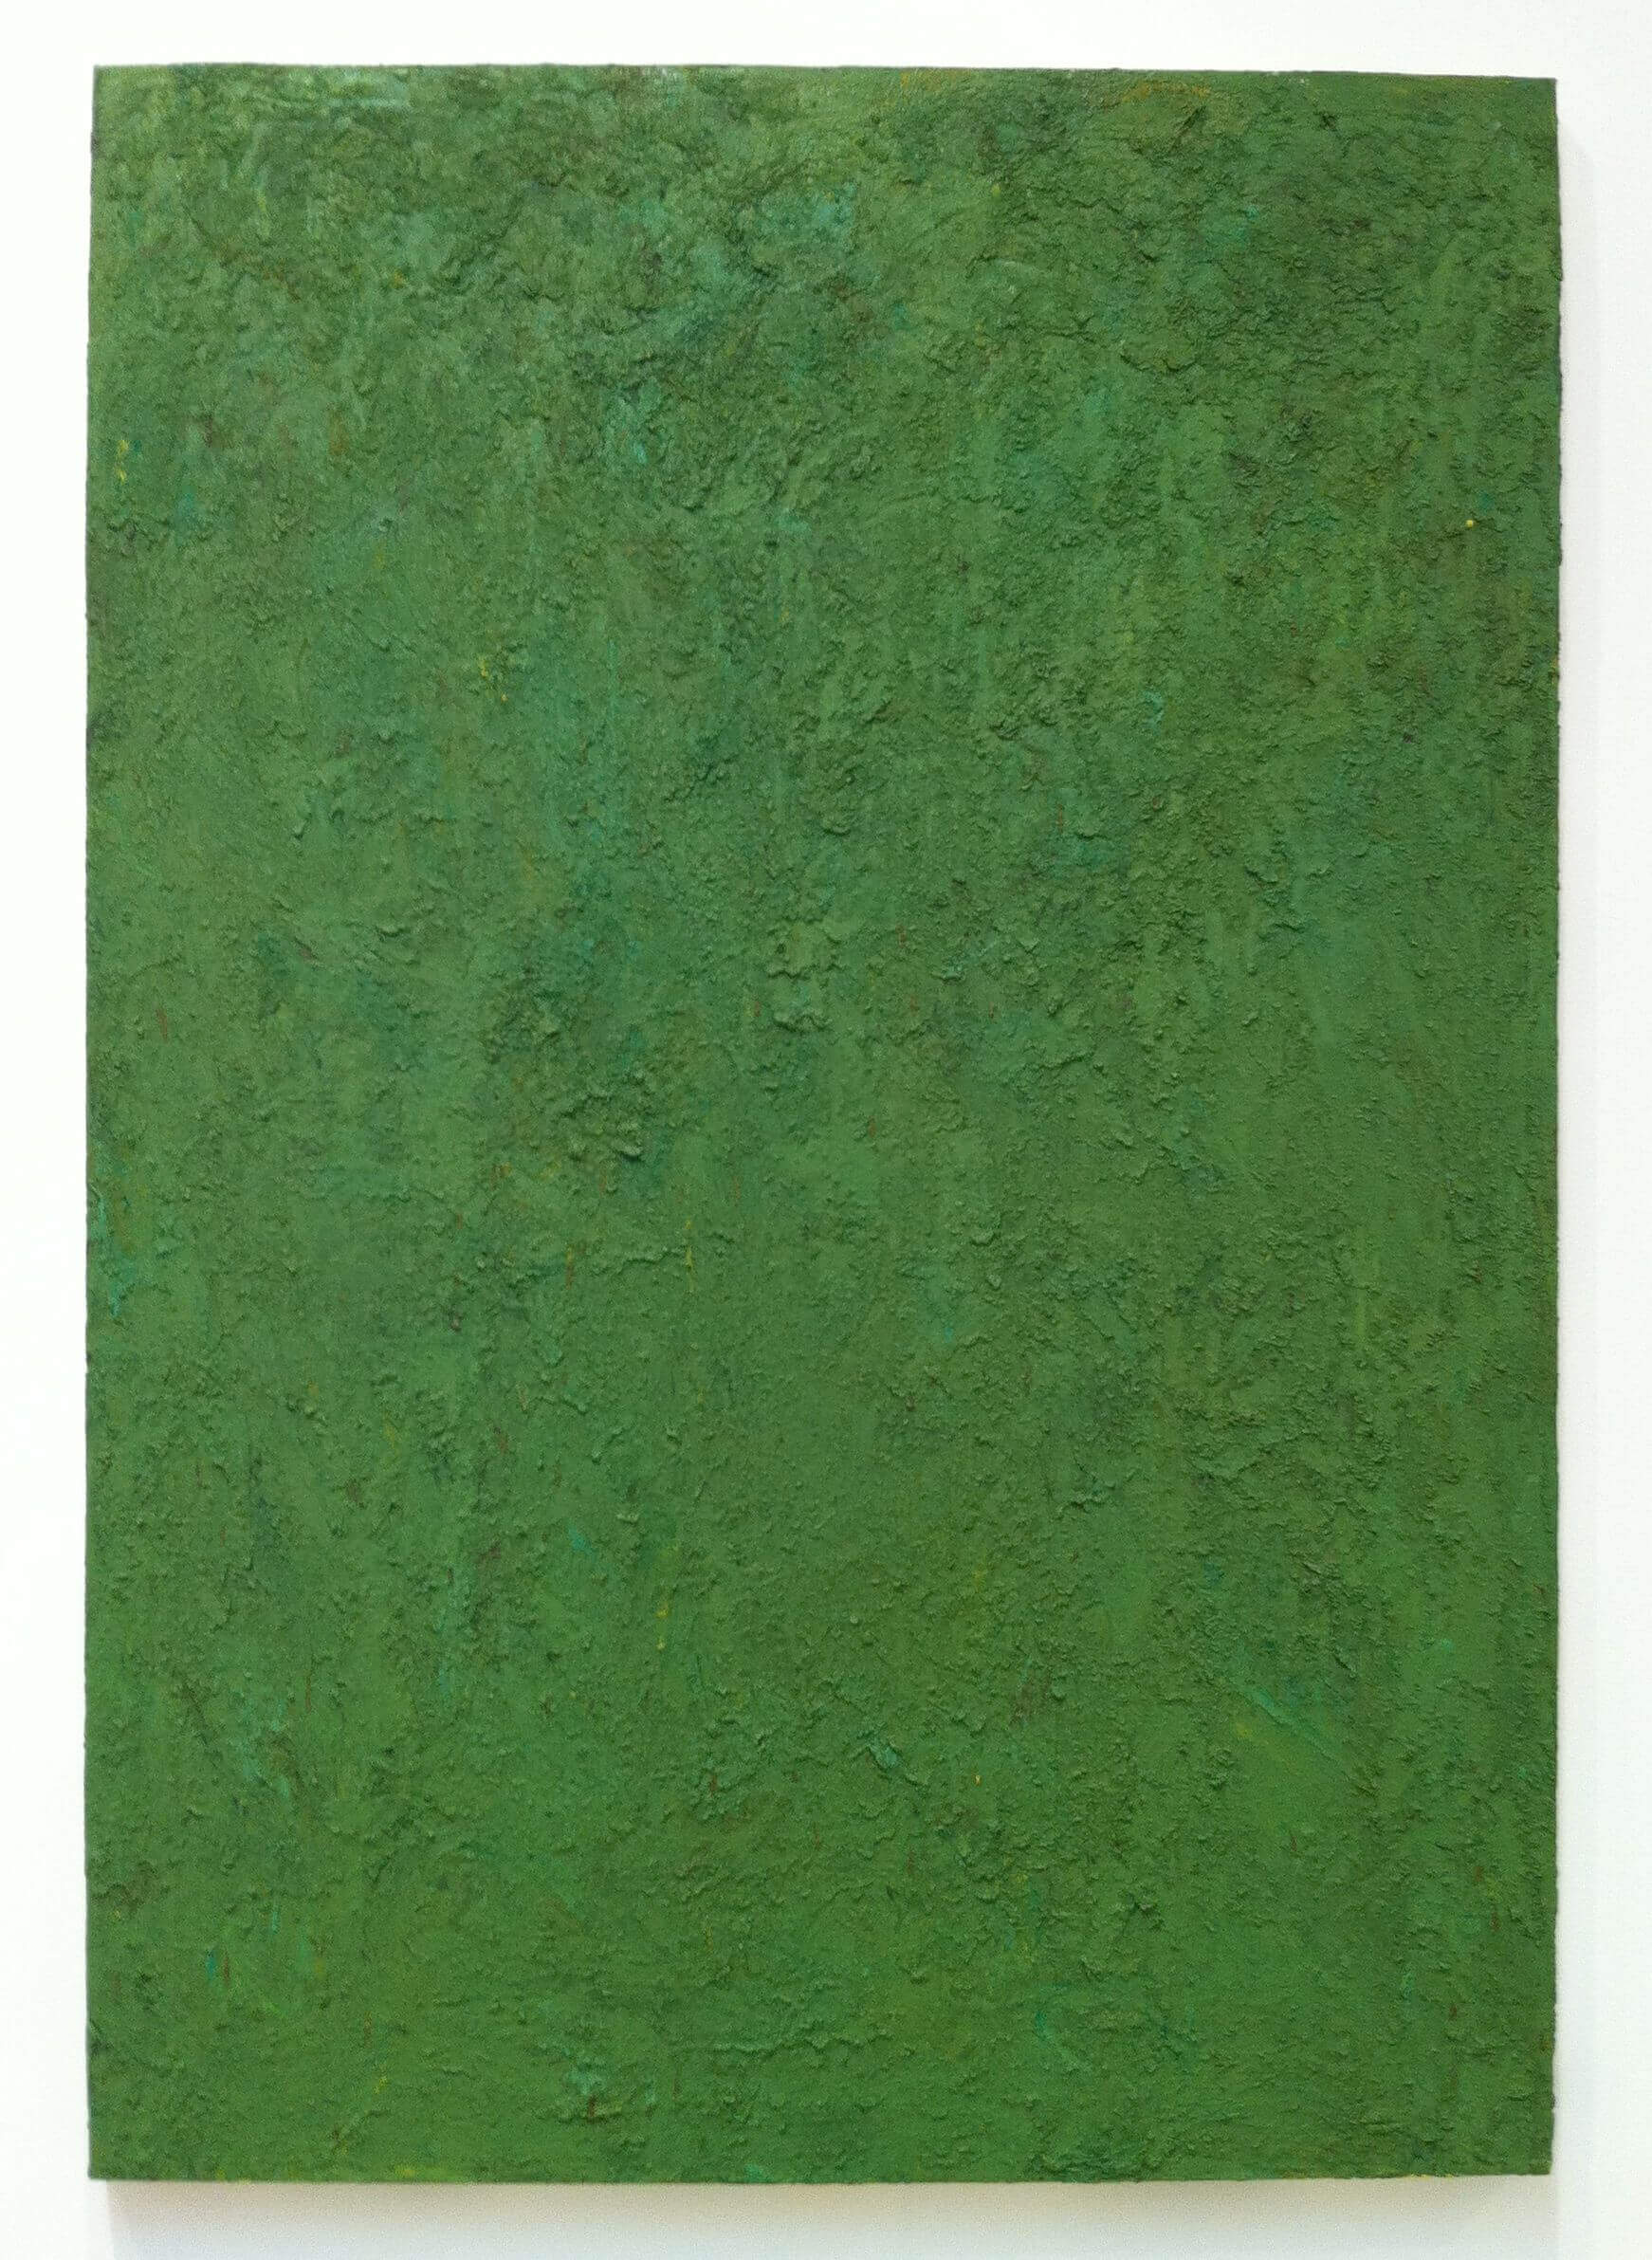 Milton Resnick, Air, 1986, Oil on canvas, 72 x 50 inches (courtesy Cheim & Read)